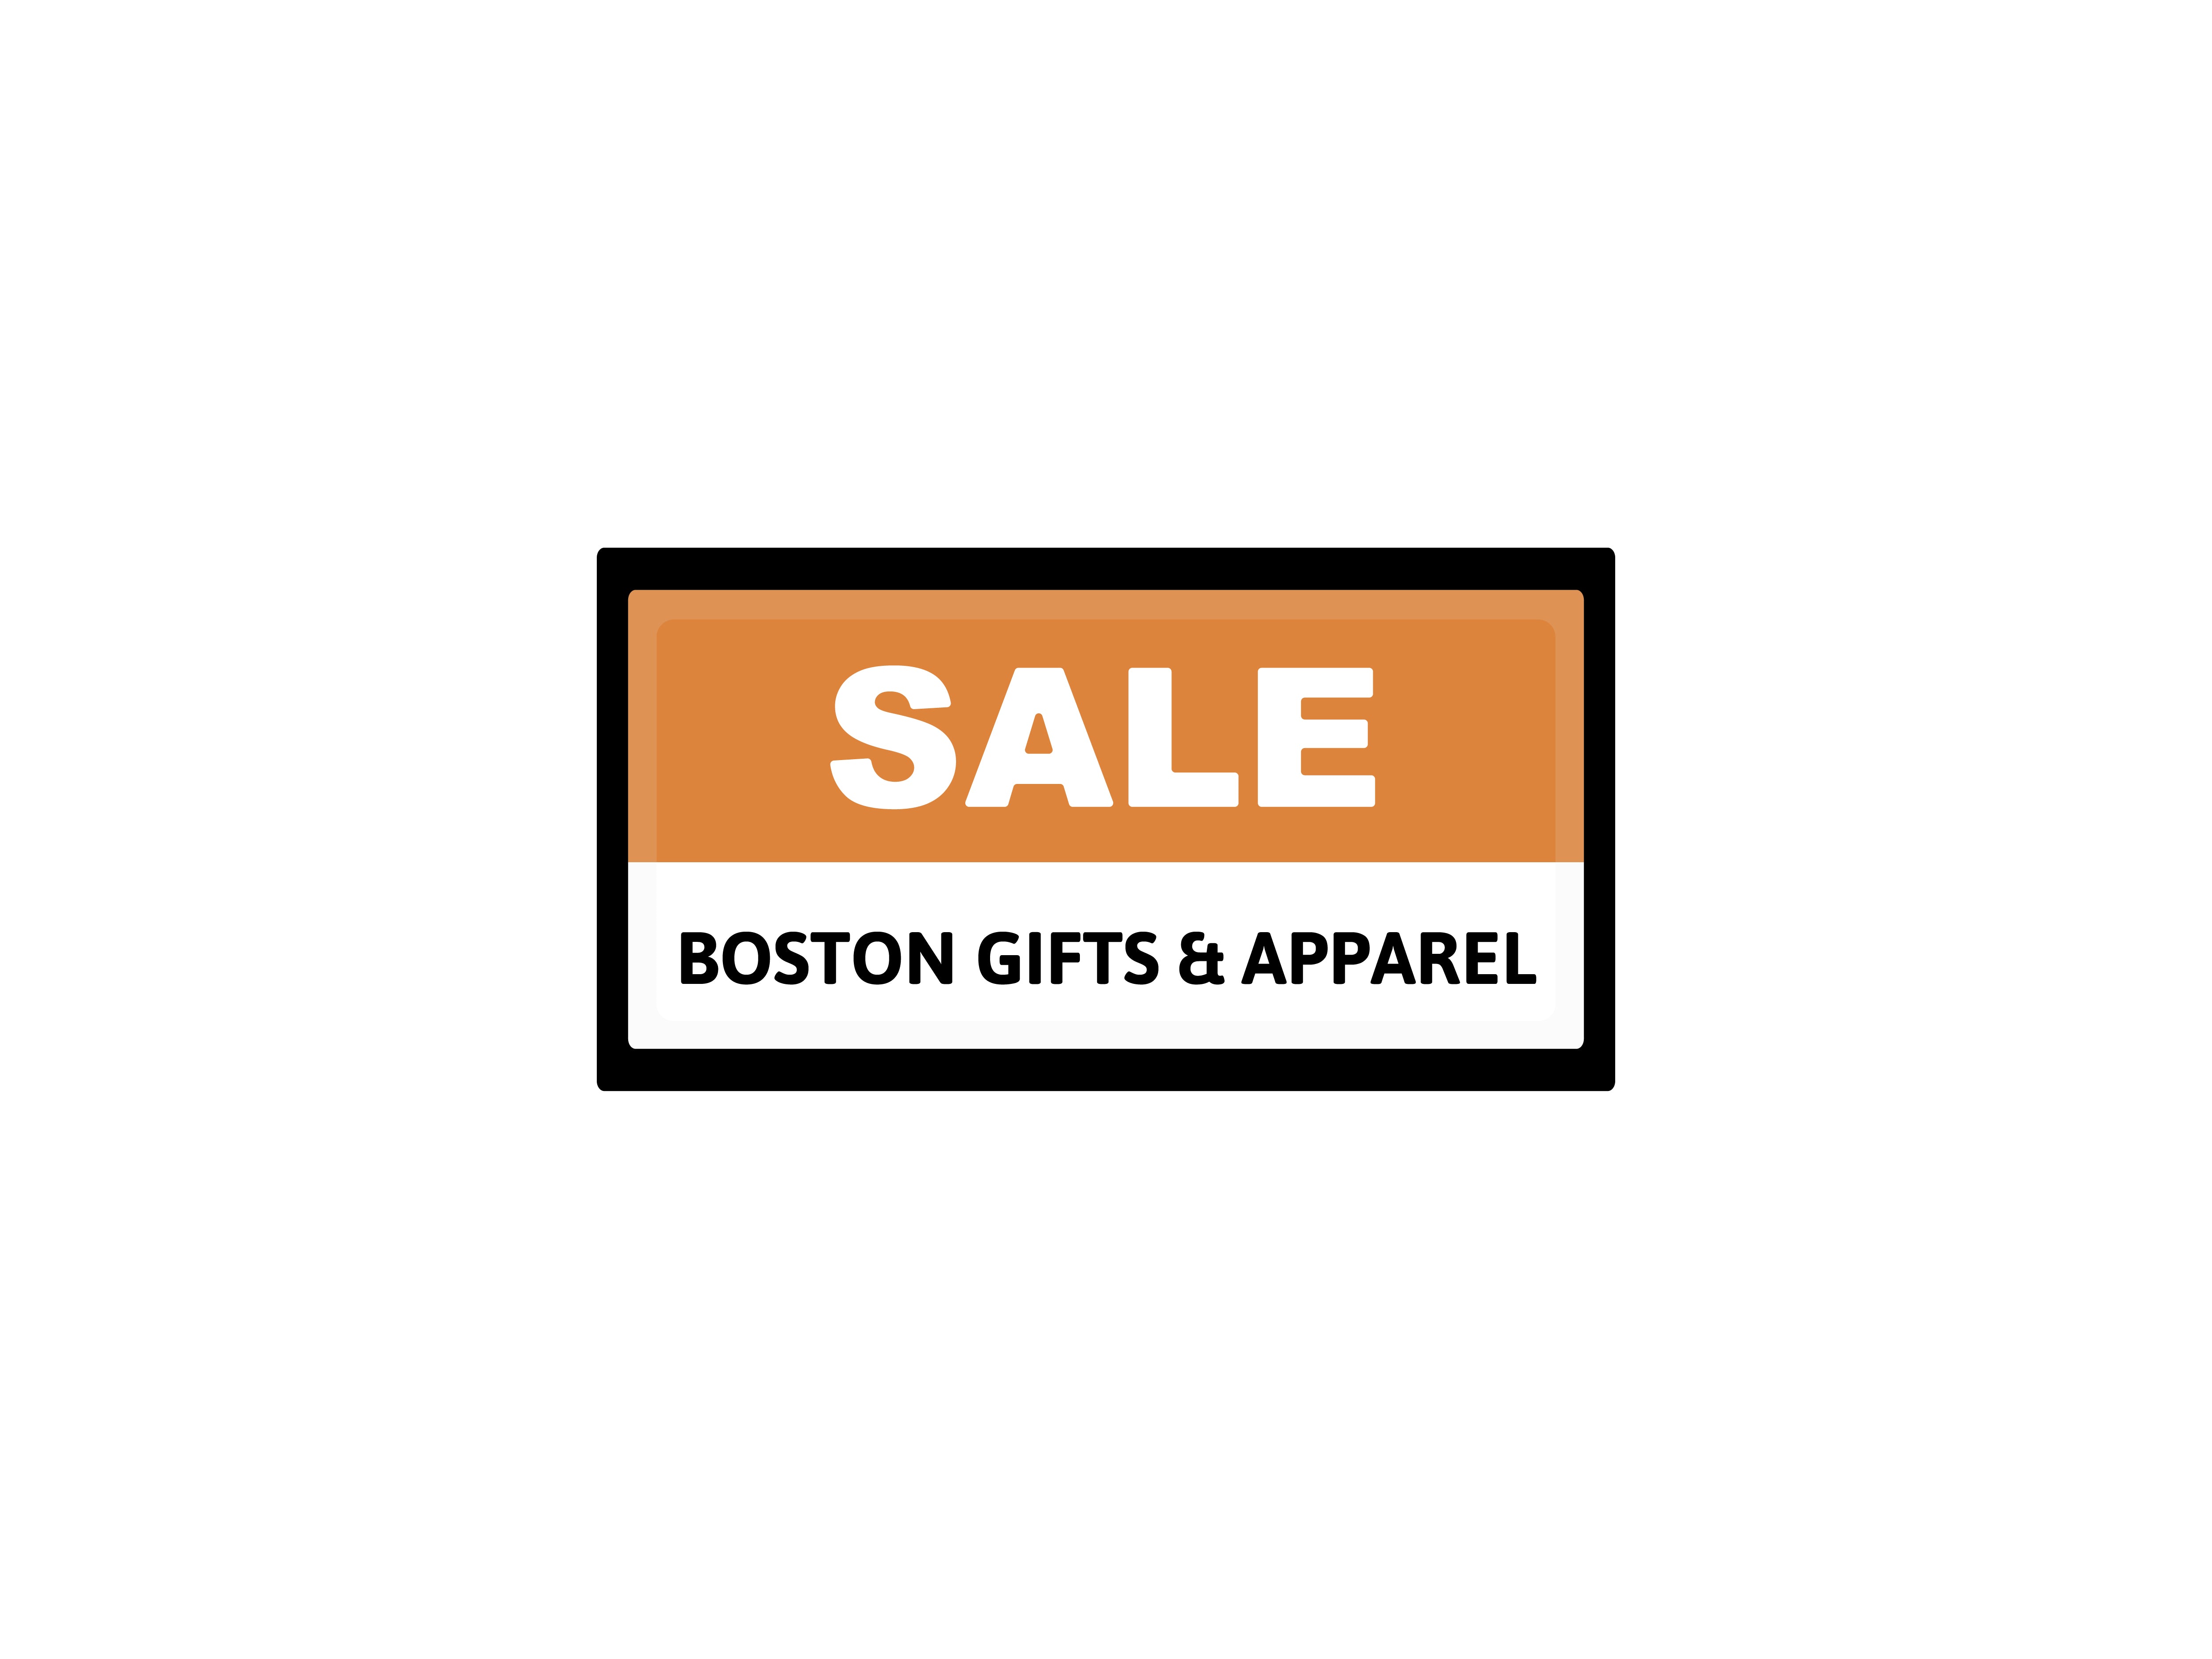 Boston-themed apparel and MBTA gifts on sale